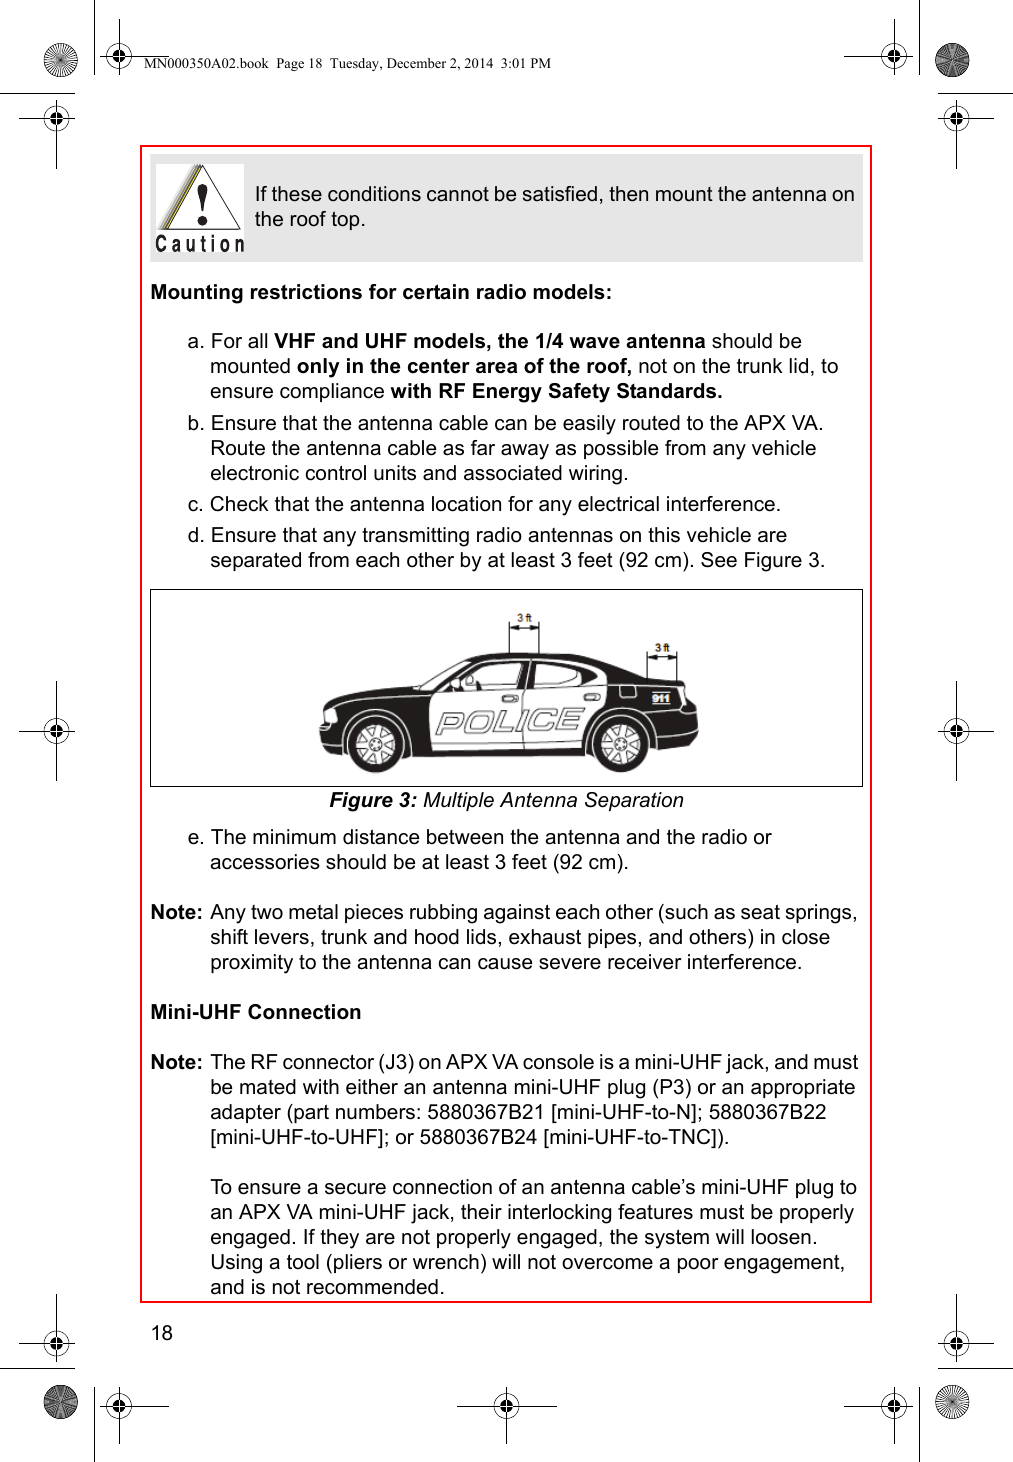 18Mounting restrictions for certain radio models:a. For all VHF and UHF models, the 1/4 wave antenna should be mounted only in the center area of the roof, not on the trunk lid, to ensure compliance with RF Energy Safety Standards.b. Ensure that the antenna cable can be easily routed to the APX VA. Route the antenna cable as far away as possible from any vehicle electronic control units and associated wiring.c. Check that the antenna location for any electrical interference.d. Ensure that any transmitting radio antennas on this vehicle are separated from each other by at least 3 feet (92 cm). See Figure 3.Figure 3: Multiple Antenna Separatione. The minimum distance between the antenna and the radio or accessories should be at least 3 feet (92 cm).Note: Any two metal pieces rubbing against each other (such as seat springs, shift levers, trunk and hood lids, exhaust pipes, and others) in close proximity to the antenna can cause severe receiver interference.Mini-UHF ConnectionNote: The RF connector (J3) on APX VA console is a mini-UHF jack, and must be mated with either an antenna mini-UHF plug (P3) or an appropriate adapter (part numbers: 5880367B21 [mini-UHF-to-N]; 5880367B22 [mini-UHF-to-UHF]; or 5880367B24 [mini-UHF-to-TNC]).To ensure a secure connection of an antenna cable’s mini-UHF plug to an APX VA mini-UHF jack, their interlocking features must be properly engaged. If they are not properly engaged, the system will loosen. Using a tool (pliers or wrench) will not overcome a poor engagement, and is not recommended.If these conditions cannot be satisfied, then mount the antenna on the roof top.MN000350A02.book  Page 18  Tuesday, December 2, 2014  3:01 PM